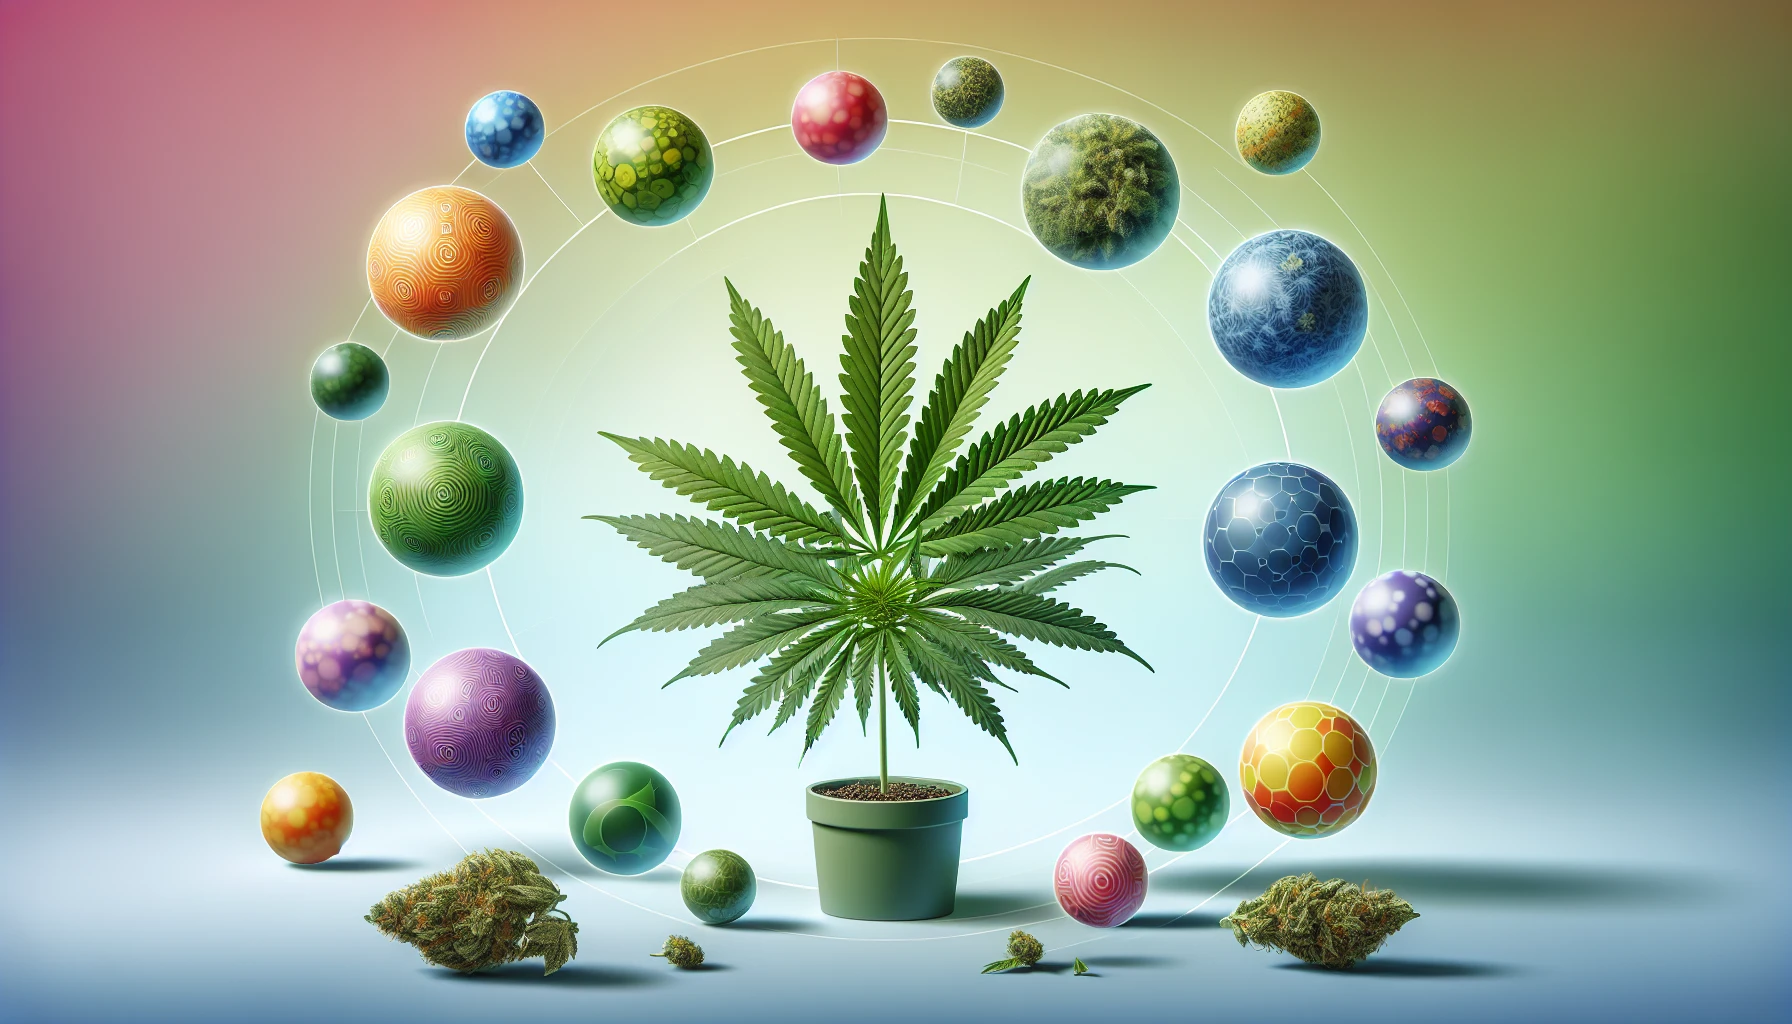 Illustration of cannabis plant and various terpenes